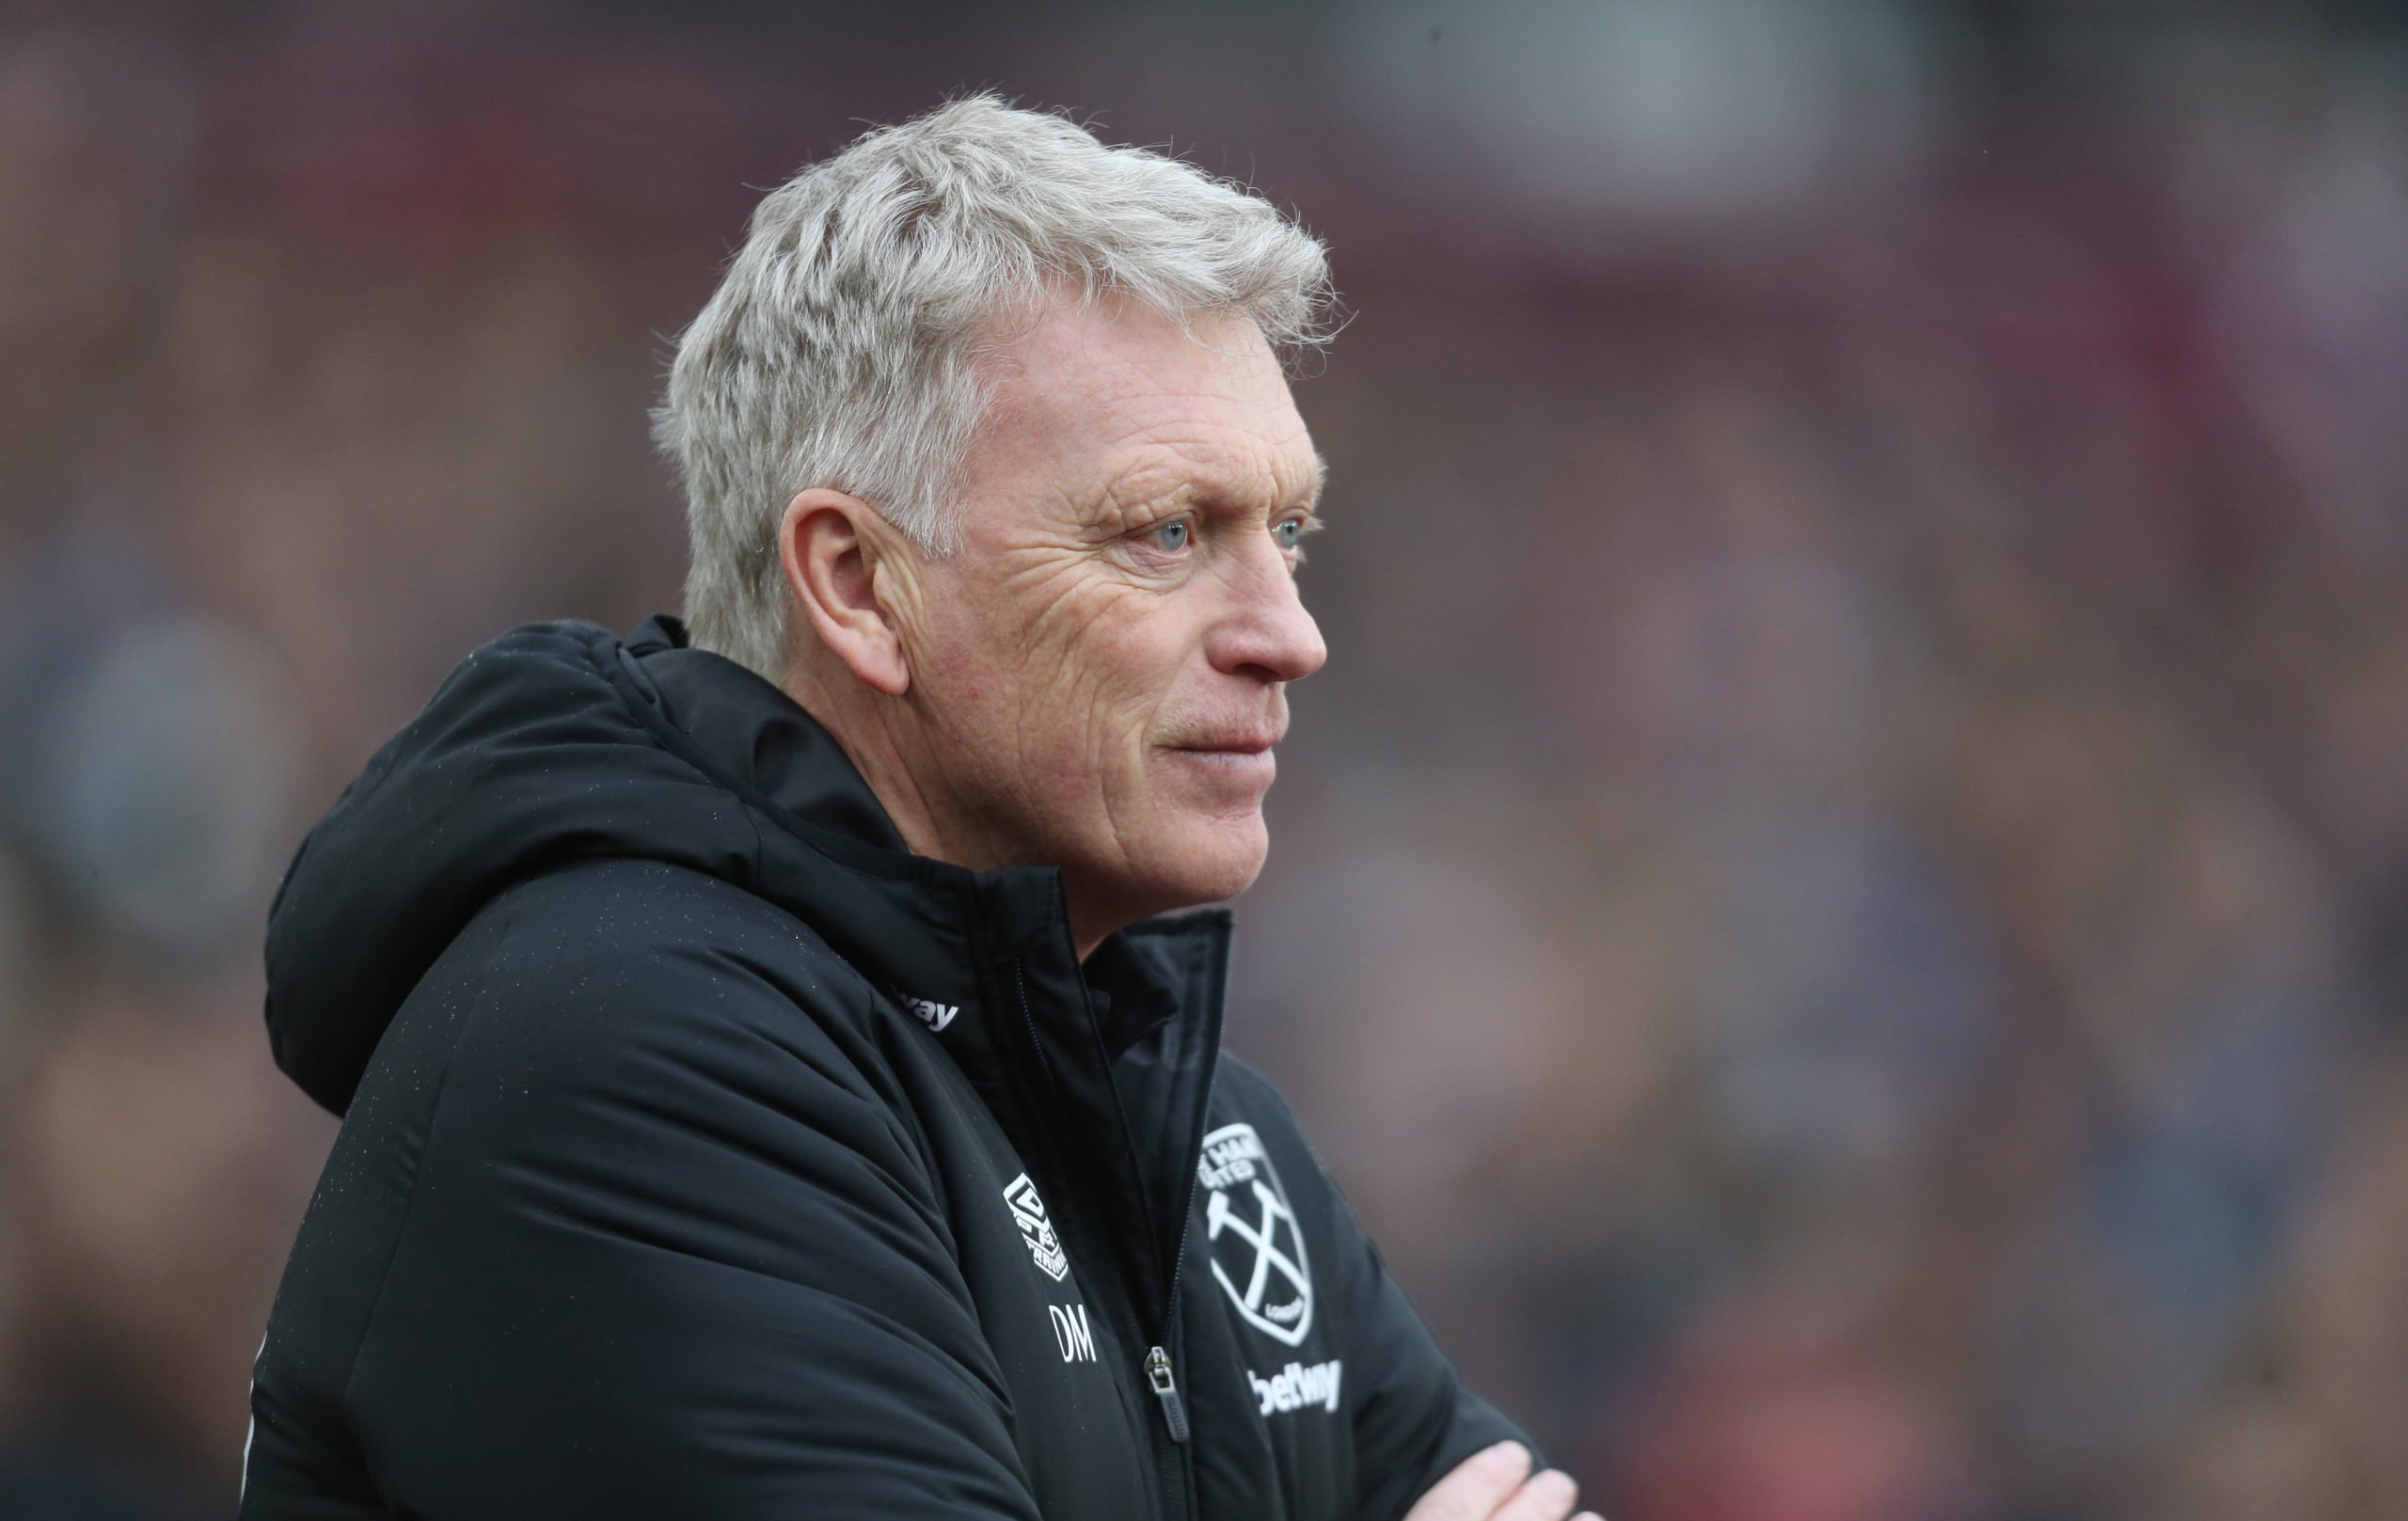 David Moyes comments suggest West Ham are about to get massive injury boost ahead of Wolves